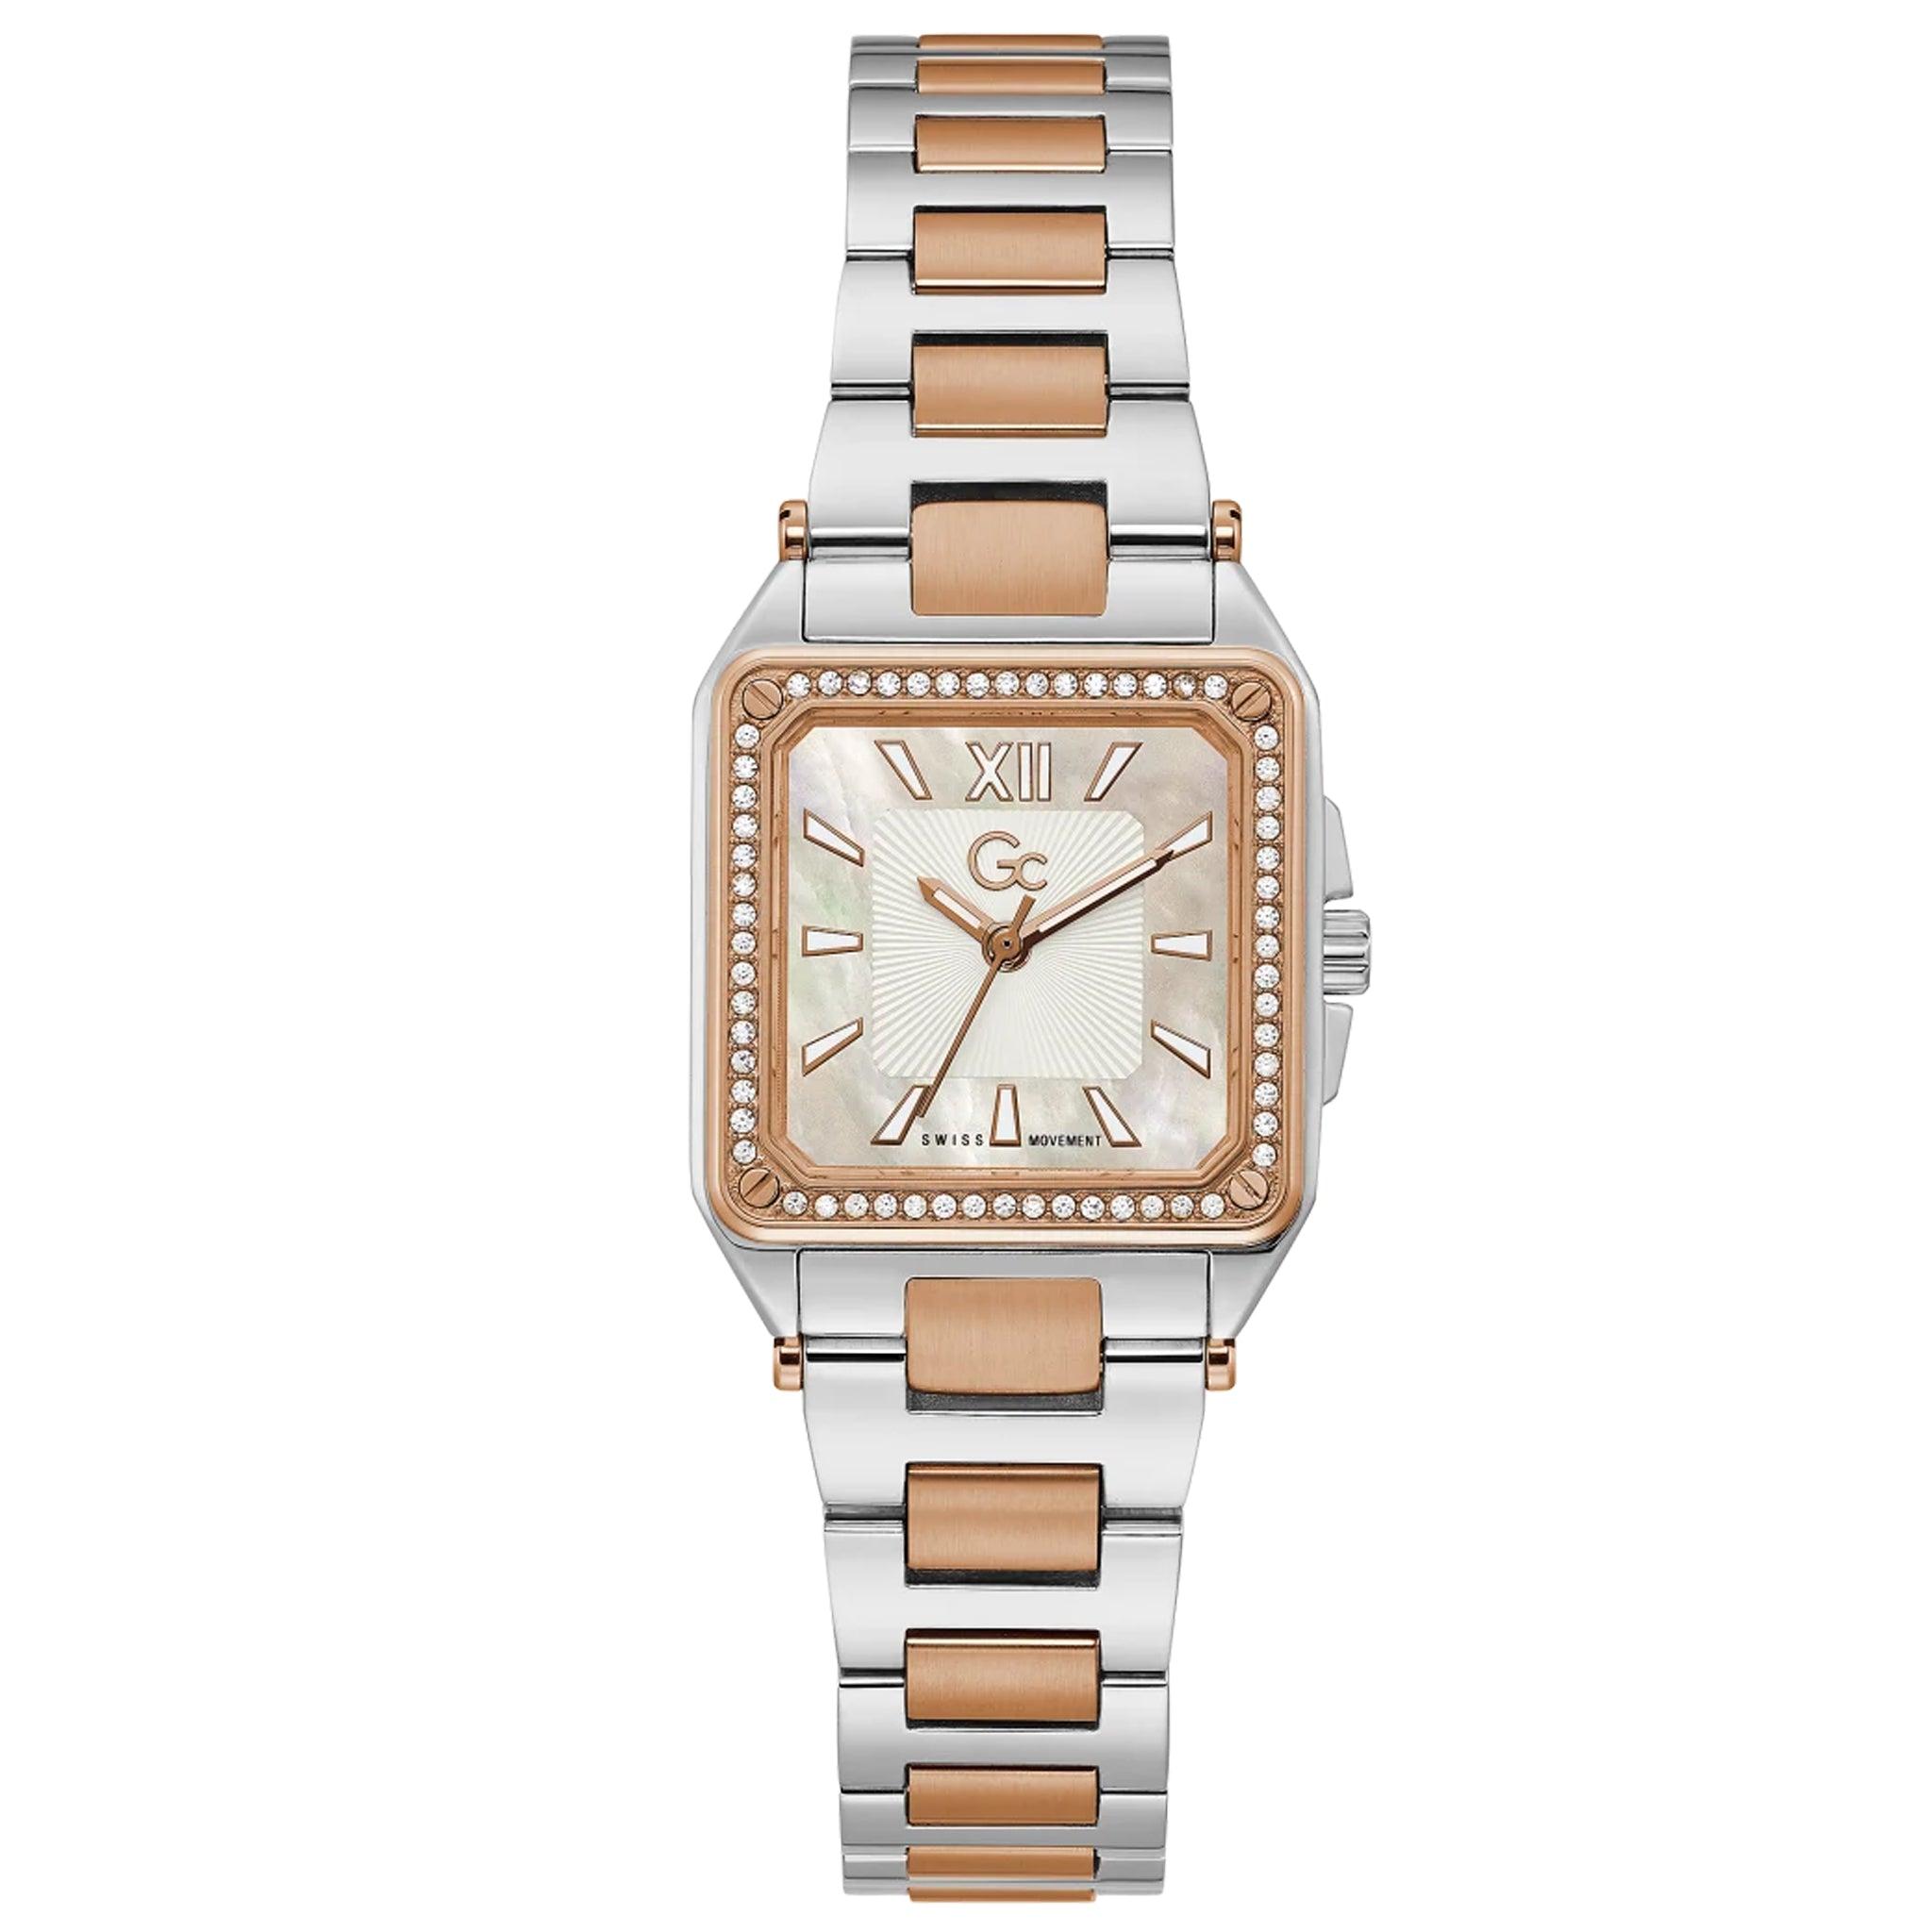 Gc Women's Couture Square Mid Size Metal Watch Y85002l1mf